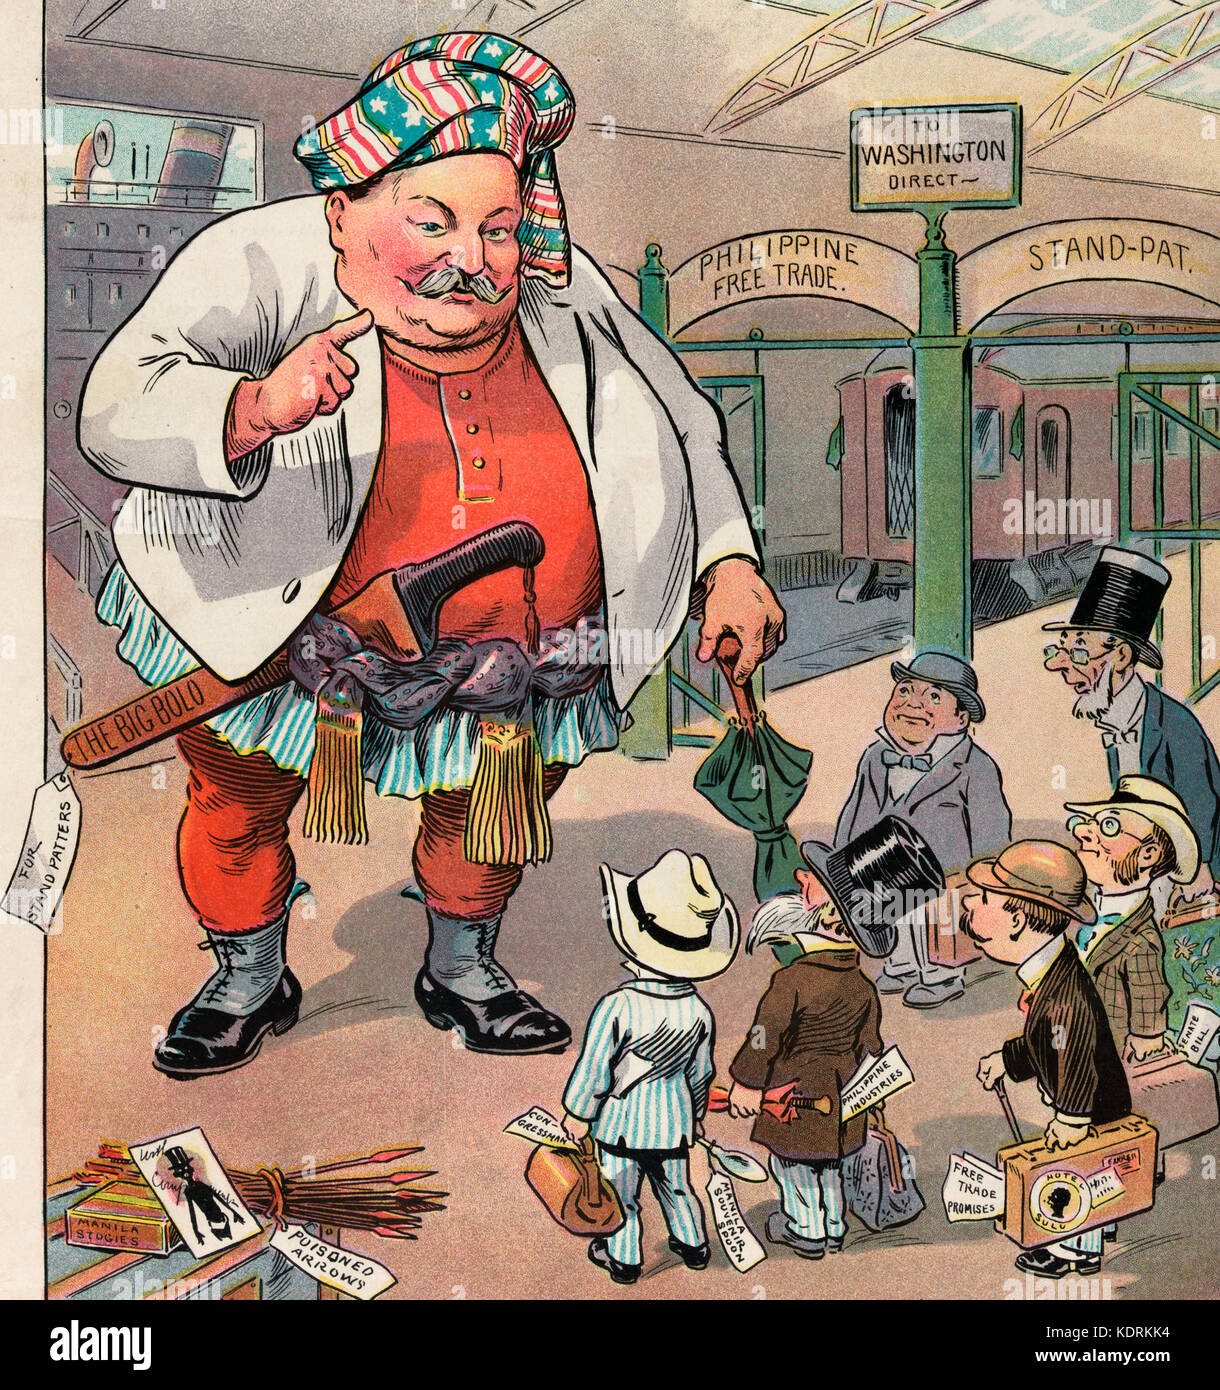 Back from Bololand - Illustration shows a large William H. Taft wearing a stars and stripes turban, with a large knife labeled 'The Big Bolo' stuck in his belt, a notice attached stating 'For Stand Patters'; he is speaking to a group of diminutive figures labeled variously 'Congressman' with a 'Manila Souvenir Spoon', 'Philippine Industries, Free Trade Promises, [and] Senate Bill'. In the background, on the left is the boarding ramp to a ship, on the right, are two entrances to a railroad station platform labeled 'To Washington Direct', one entrance is labeled 'Philippine Free Trade' and the o Stock Photo